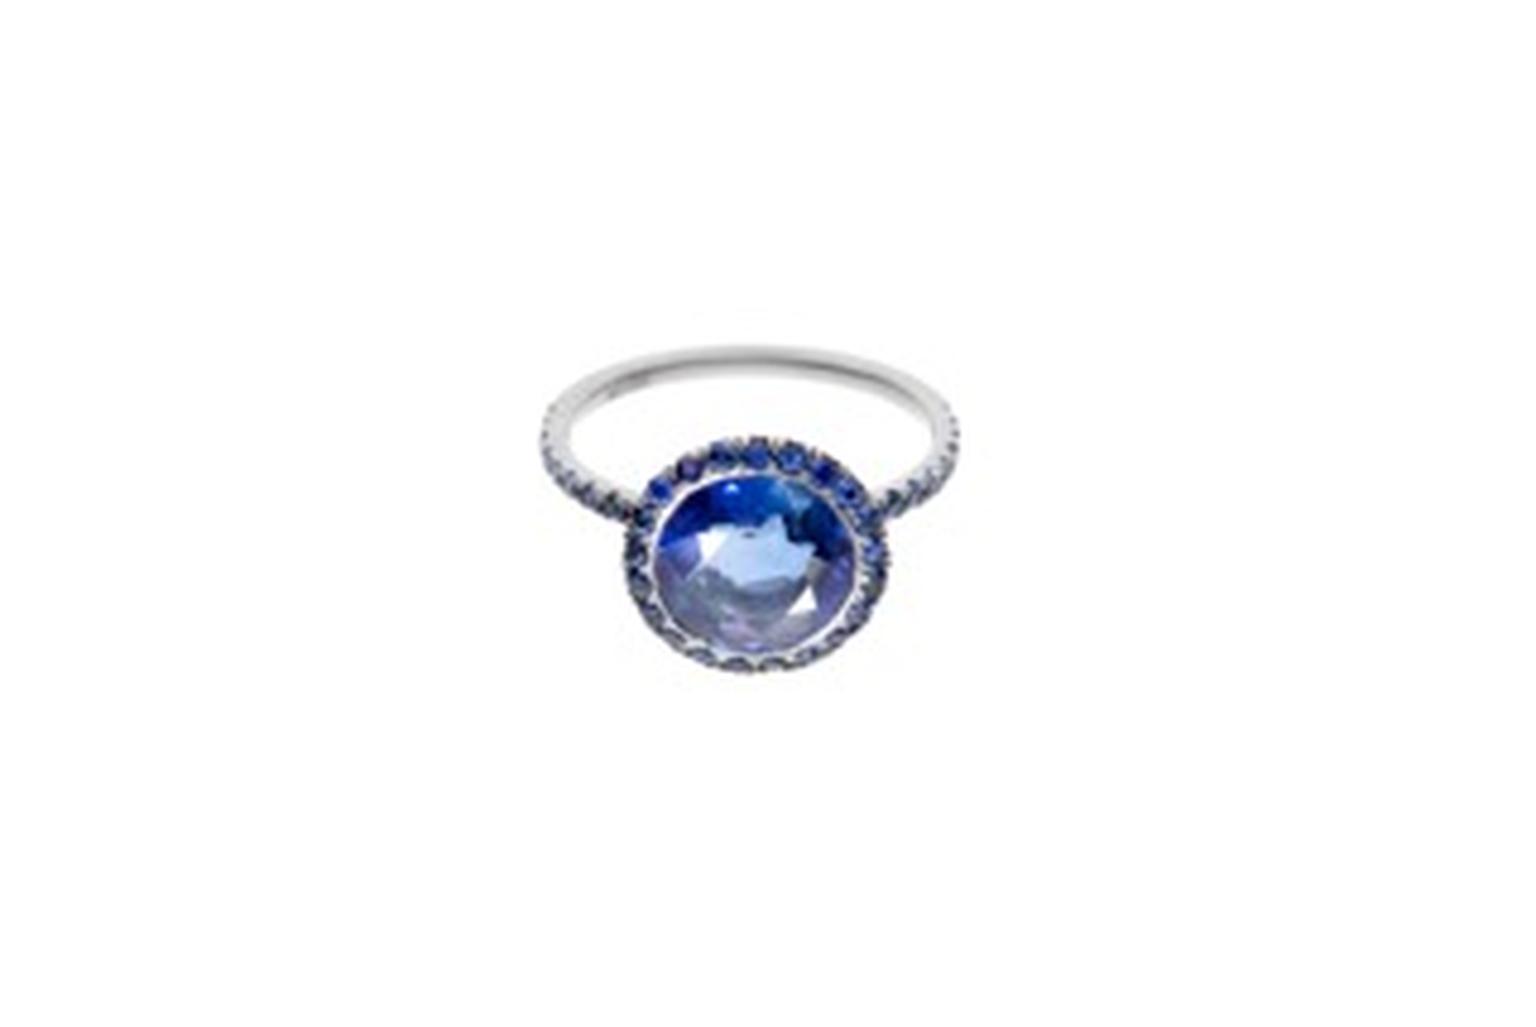 William Welstead ring featuring a central sapphire surrounded by a pavé of sapphires. Available exclusively from Dover Street Market.